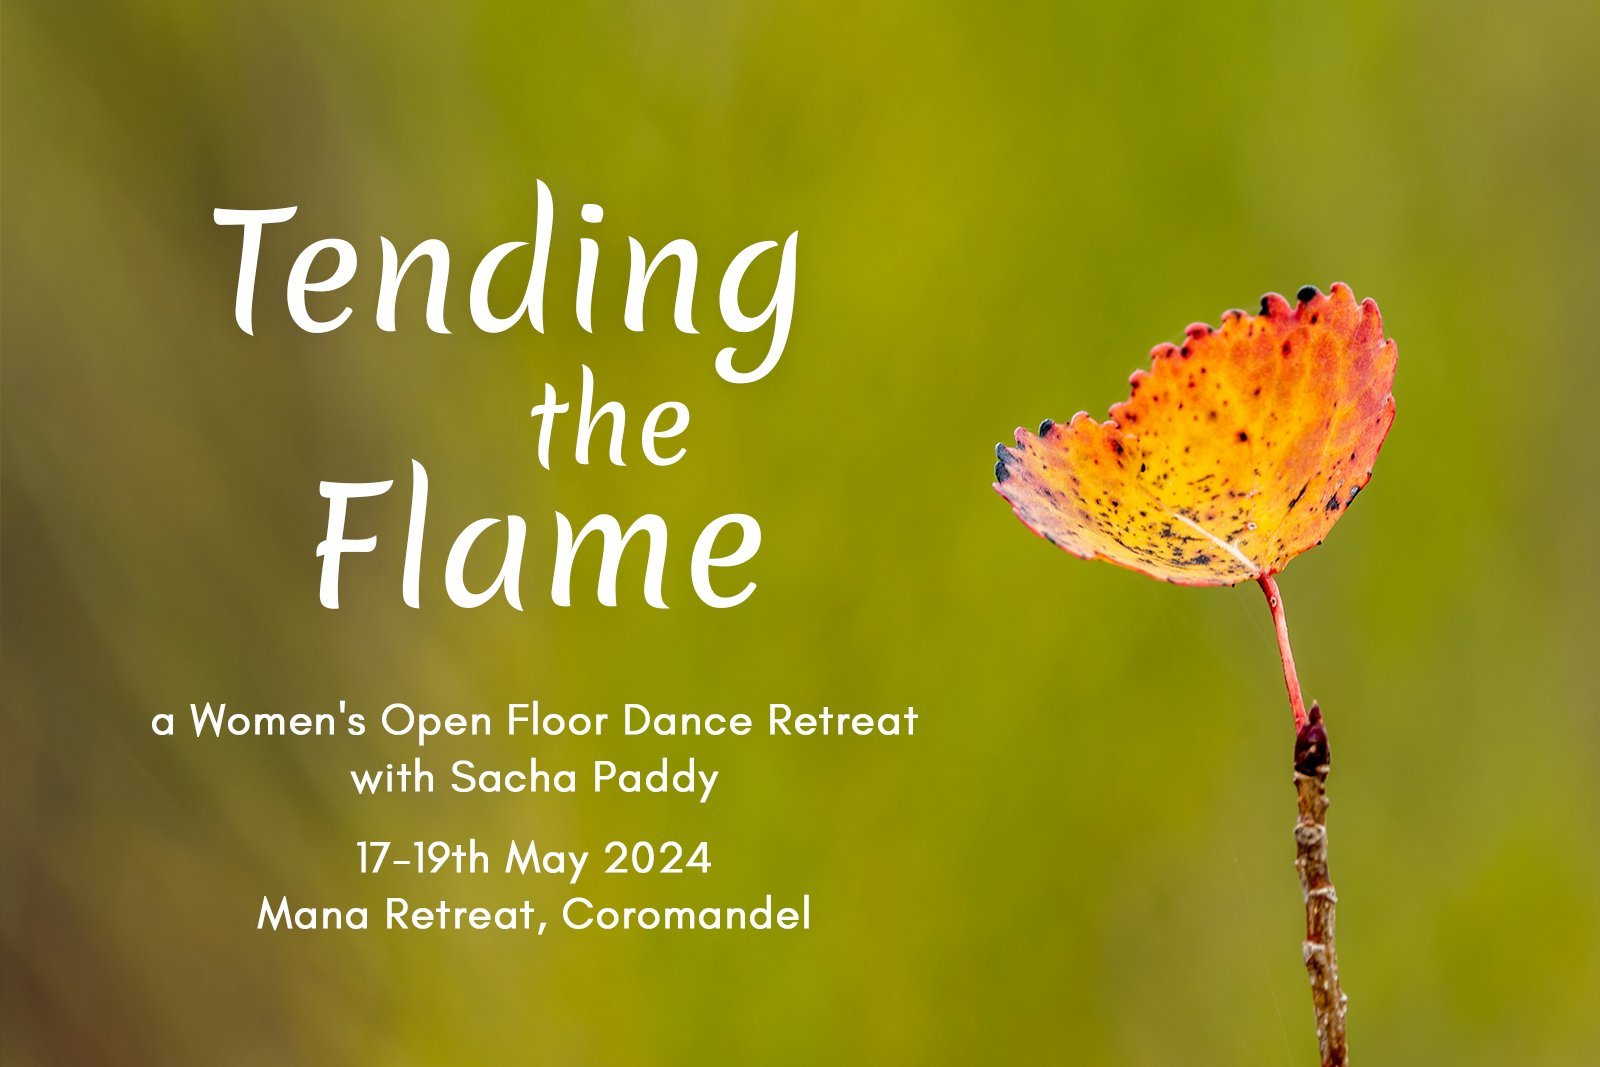 Tending the Flame, a Women's Open Floor Dance Retreat, with Sacha Paddy